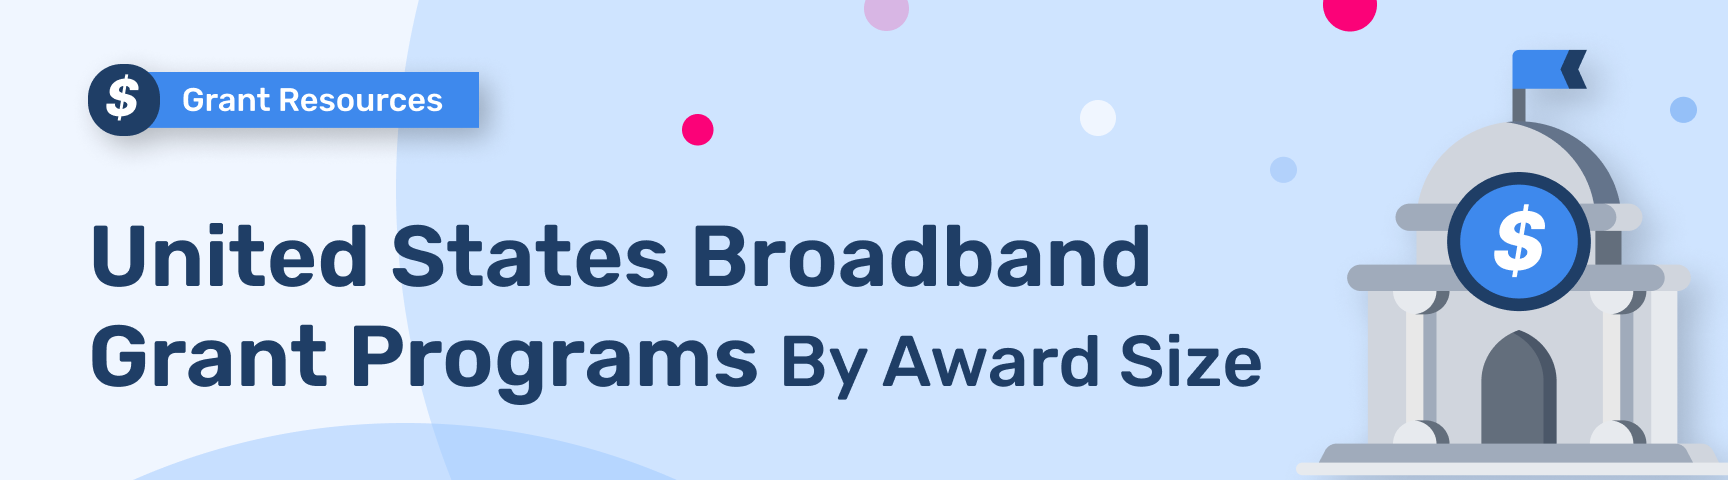 United States Broadband Grant Programs By Award Size Banner Image